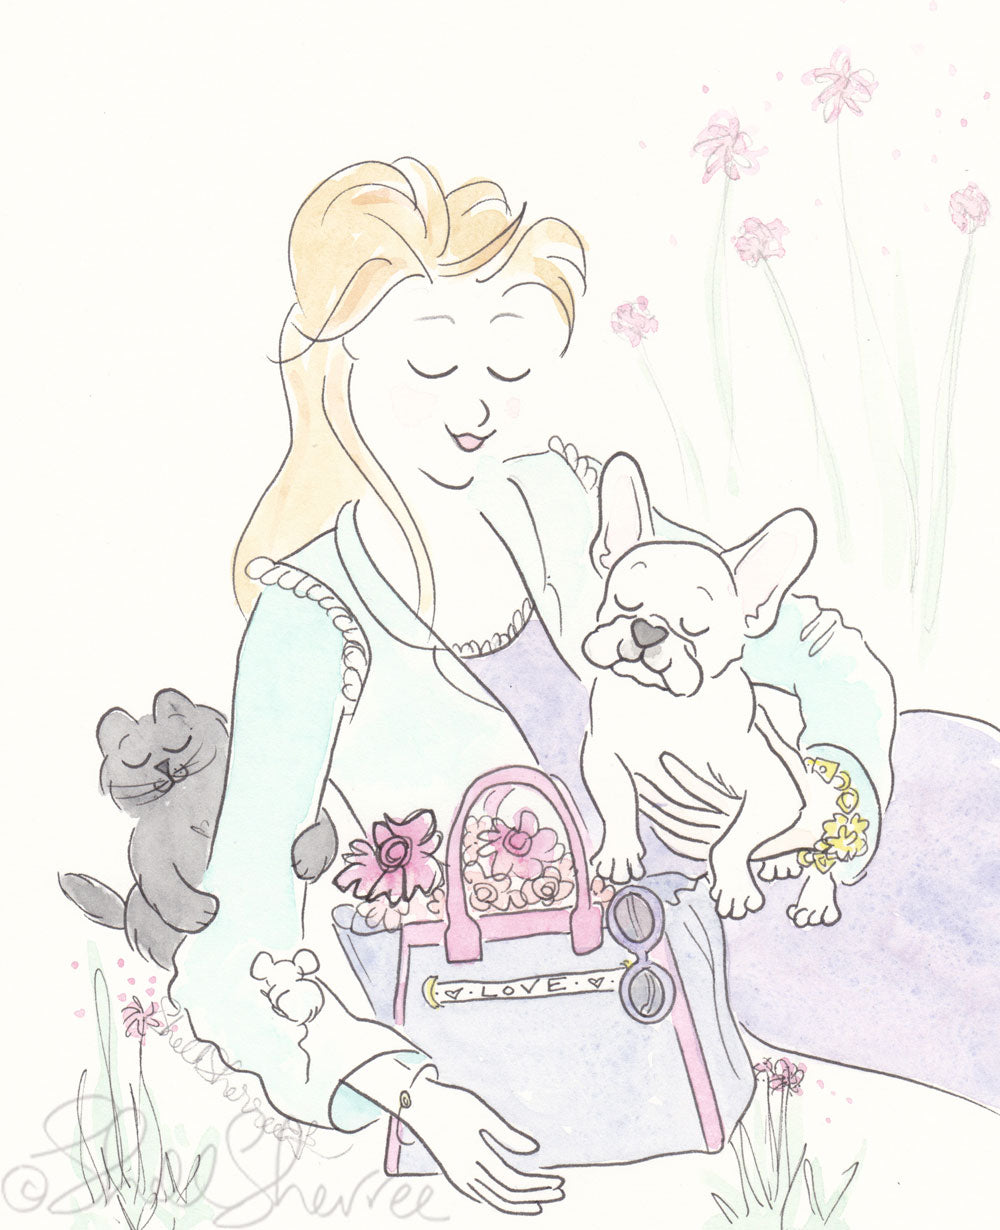 white french bulldog puppy cuddles in the park with black cat, shell sherree illustration